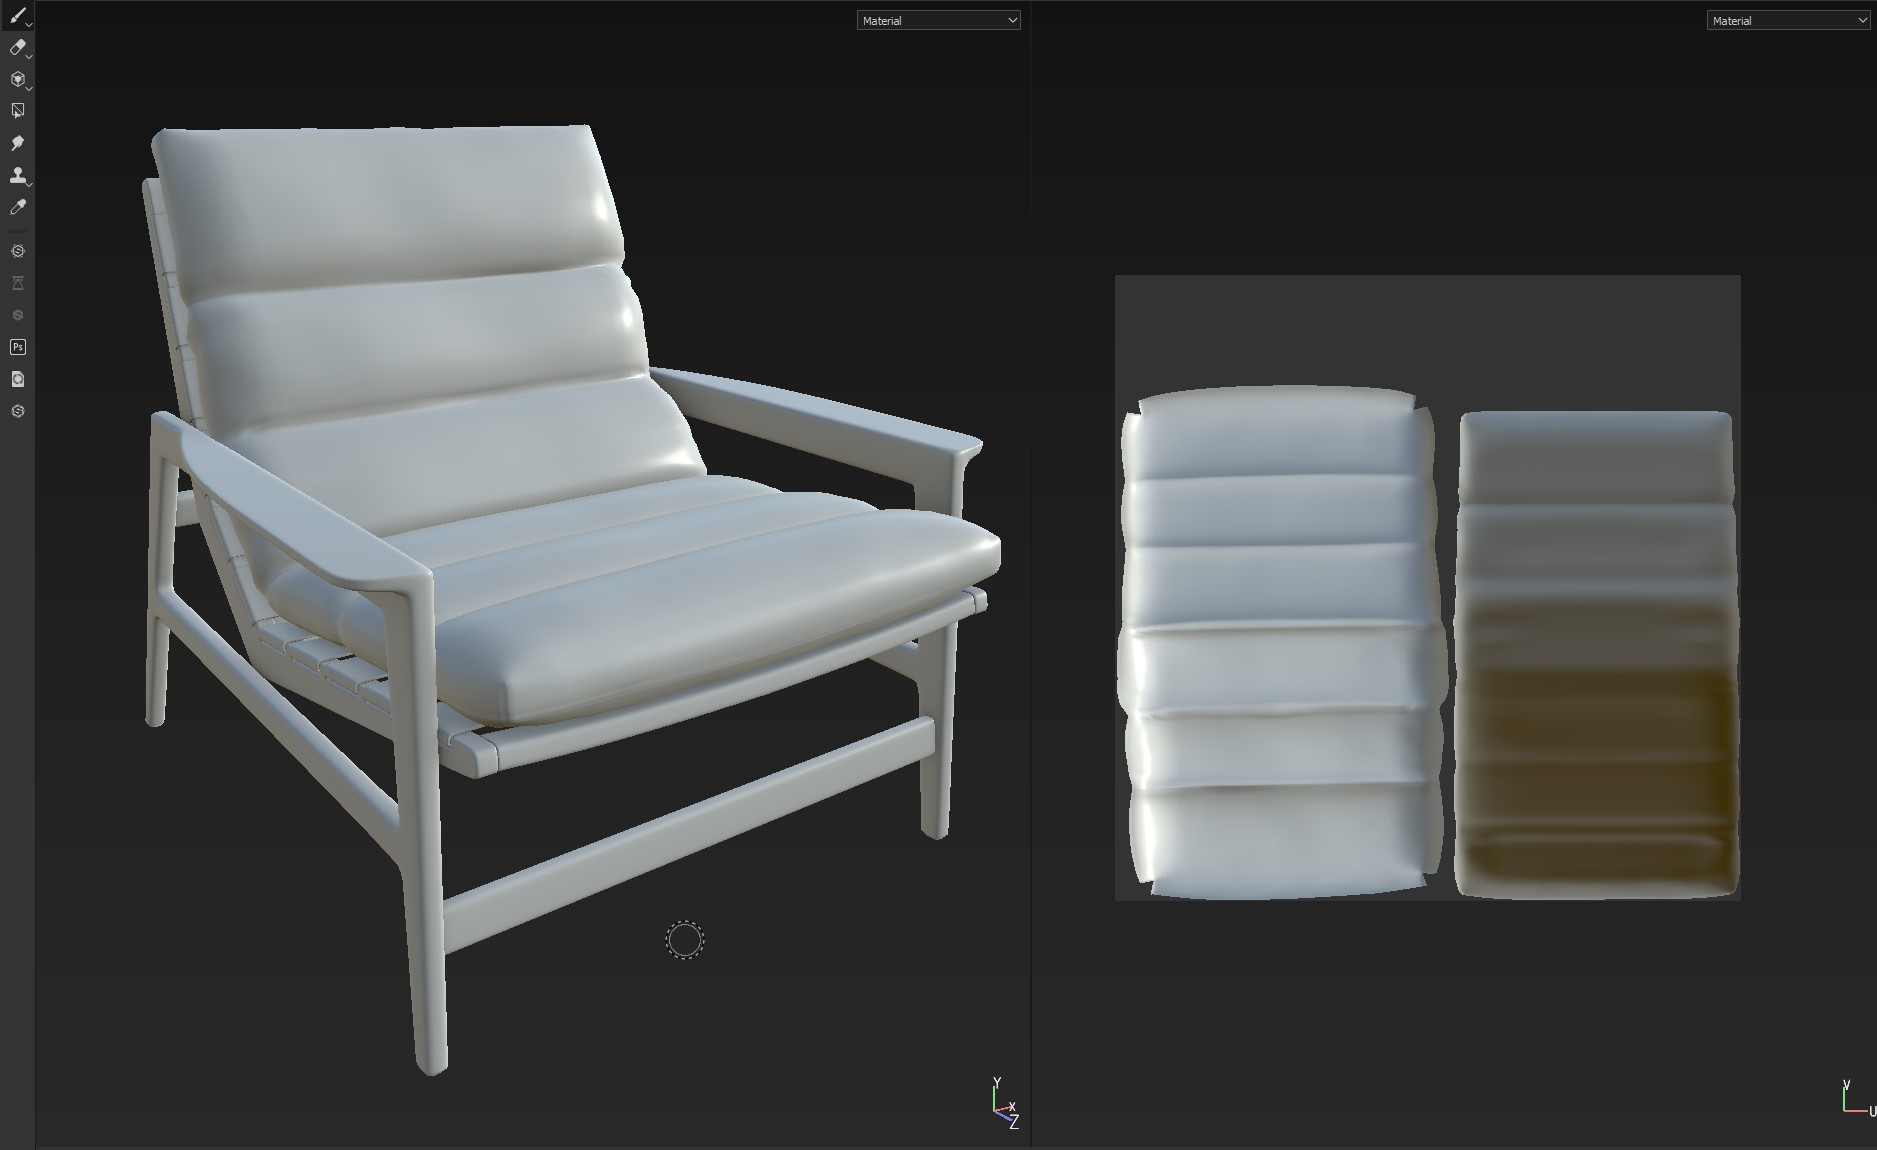 Texturing and Material Application to a 3D Model